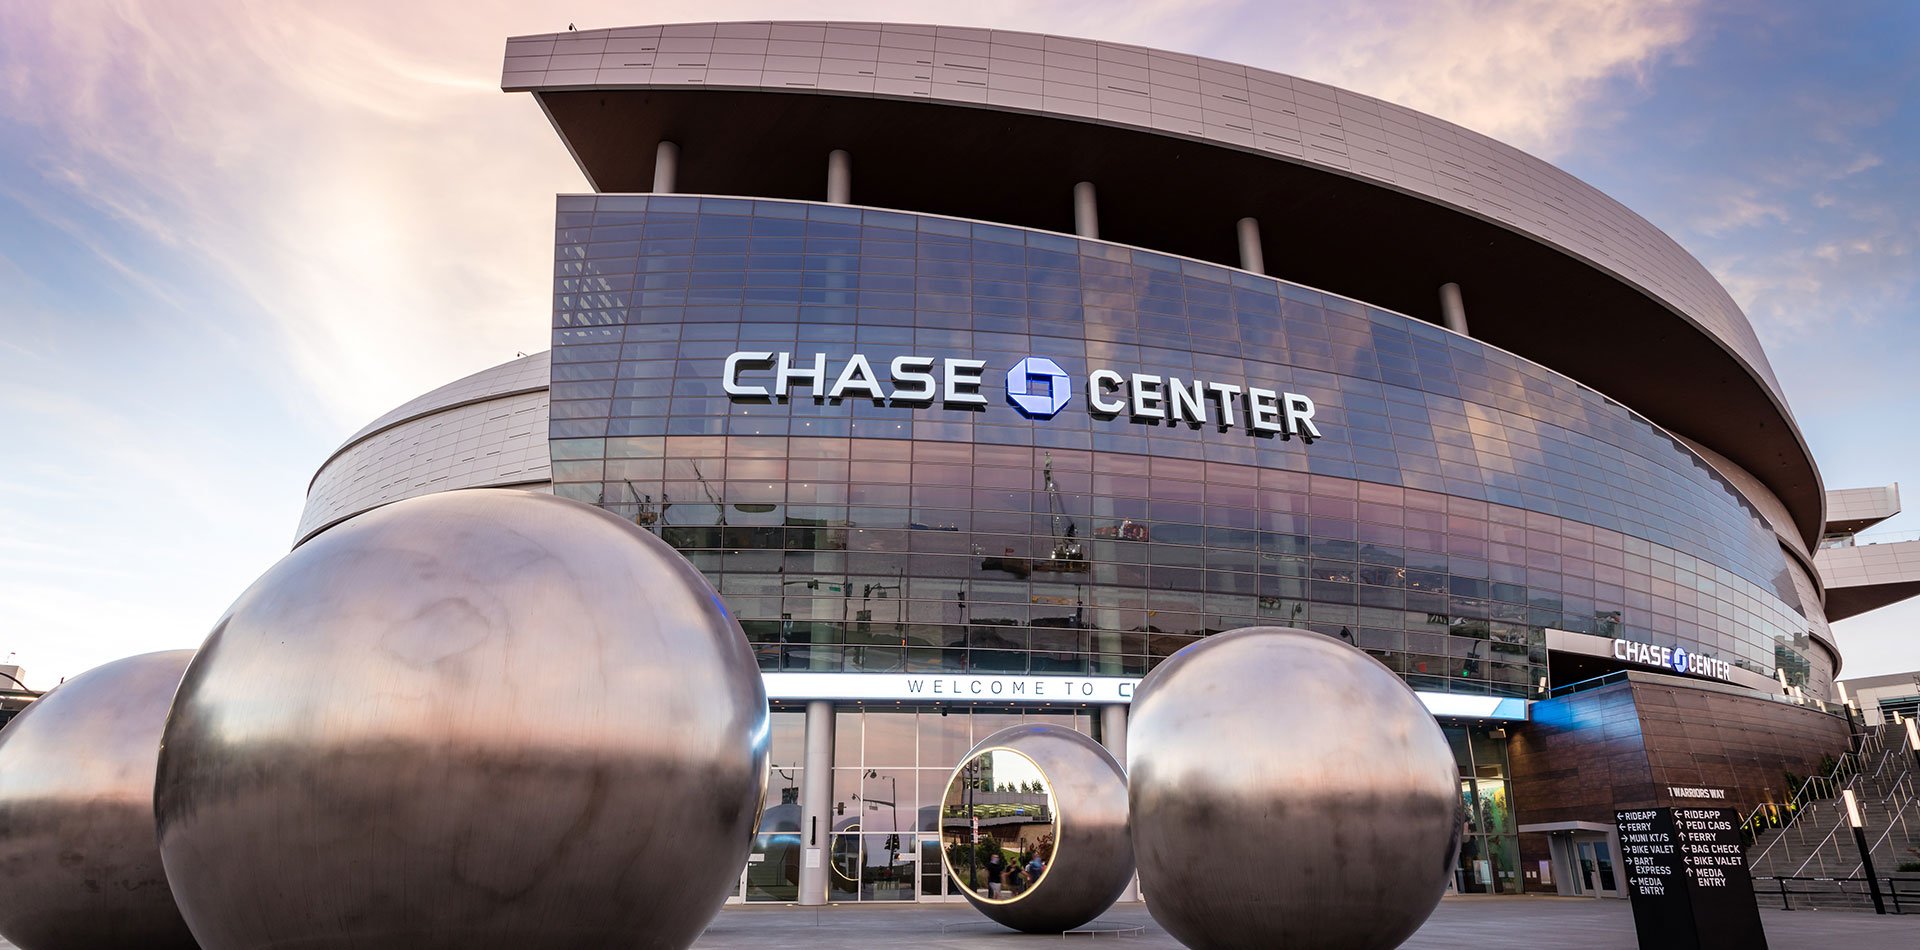 Chase Center is the Golden State Warriors' Dramatic Home